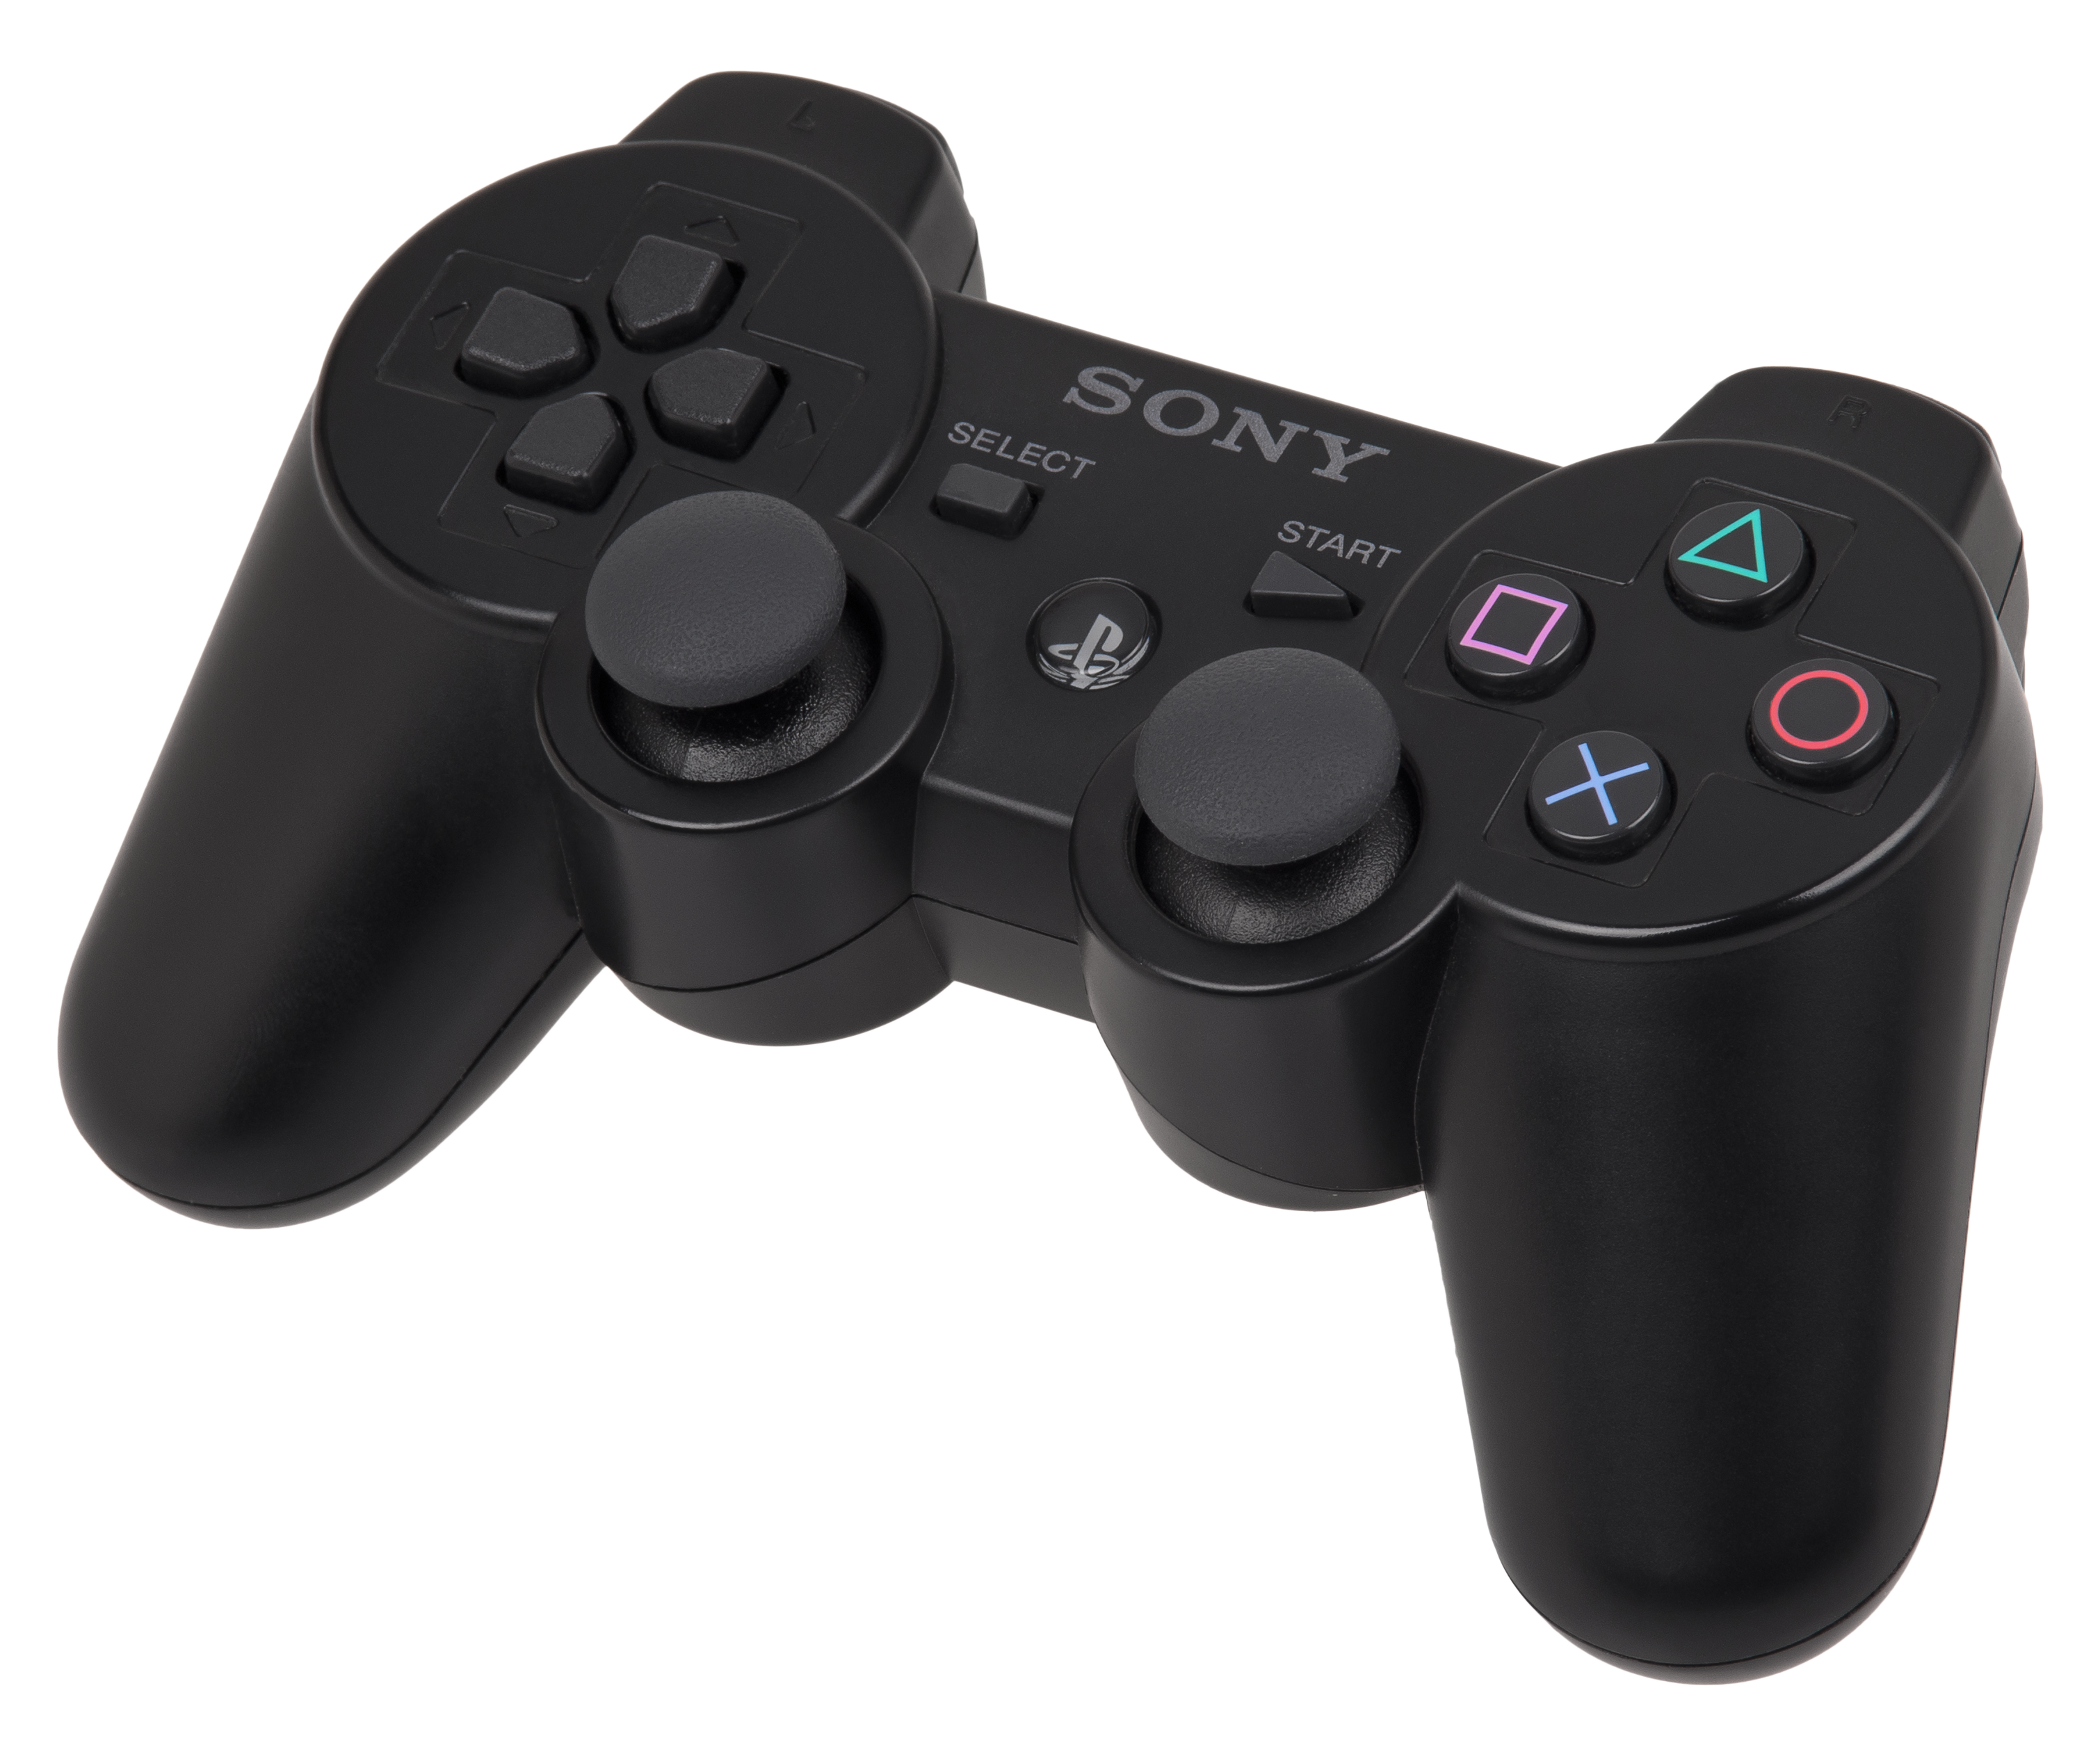 Picture of DUALSHOCK 3 Wireless Controller